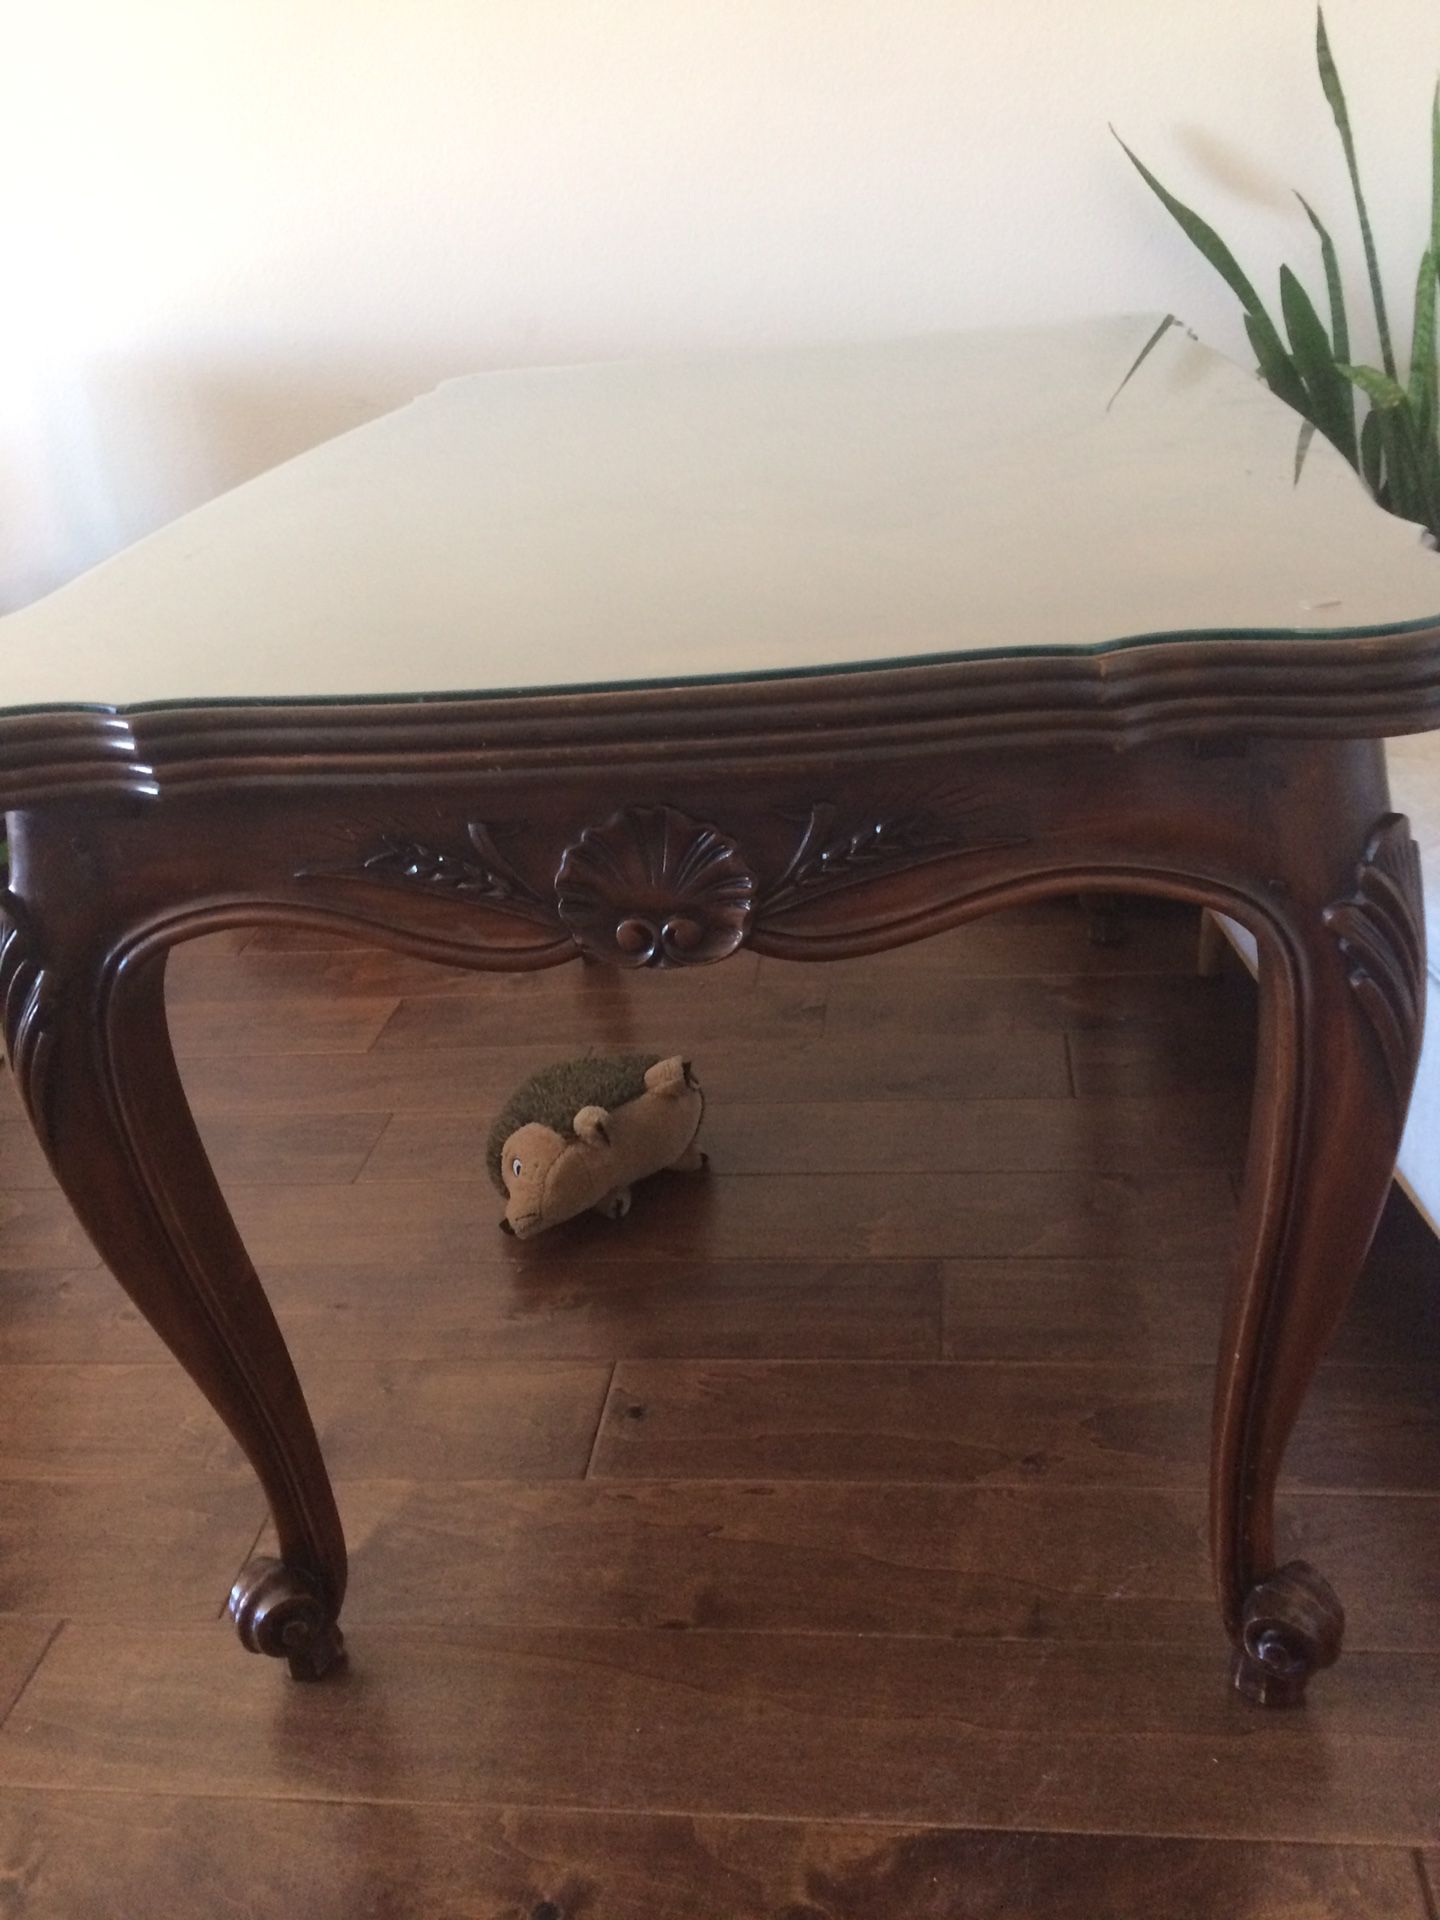 Free beautiful antique table. All wood color is dark brown.